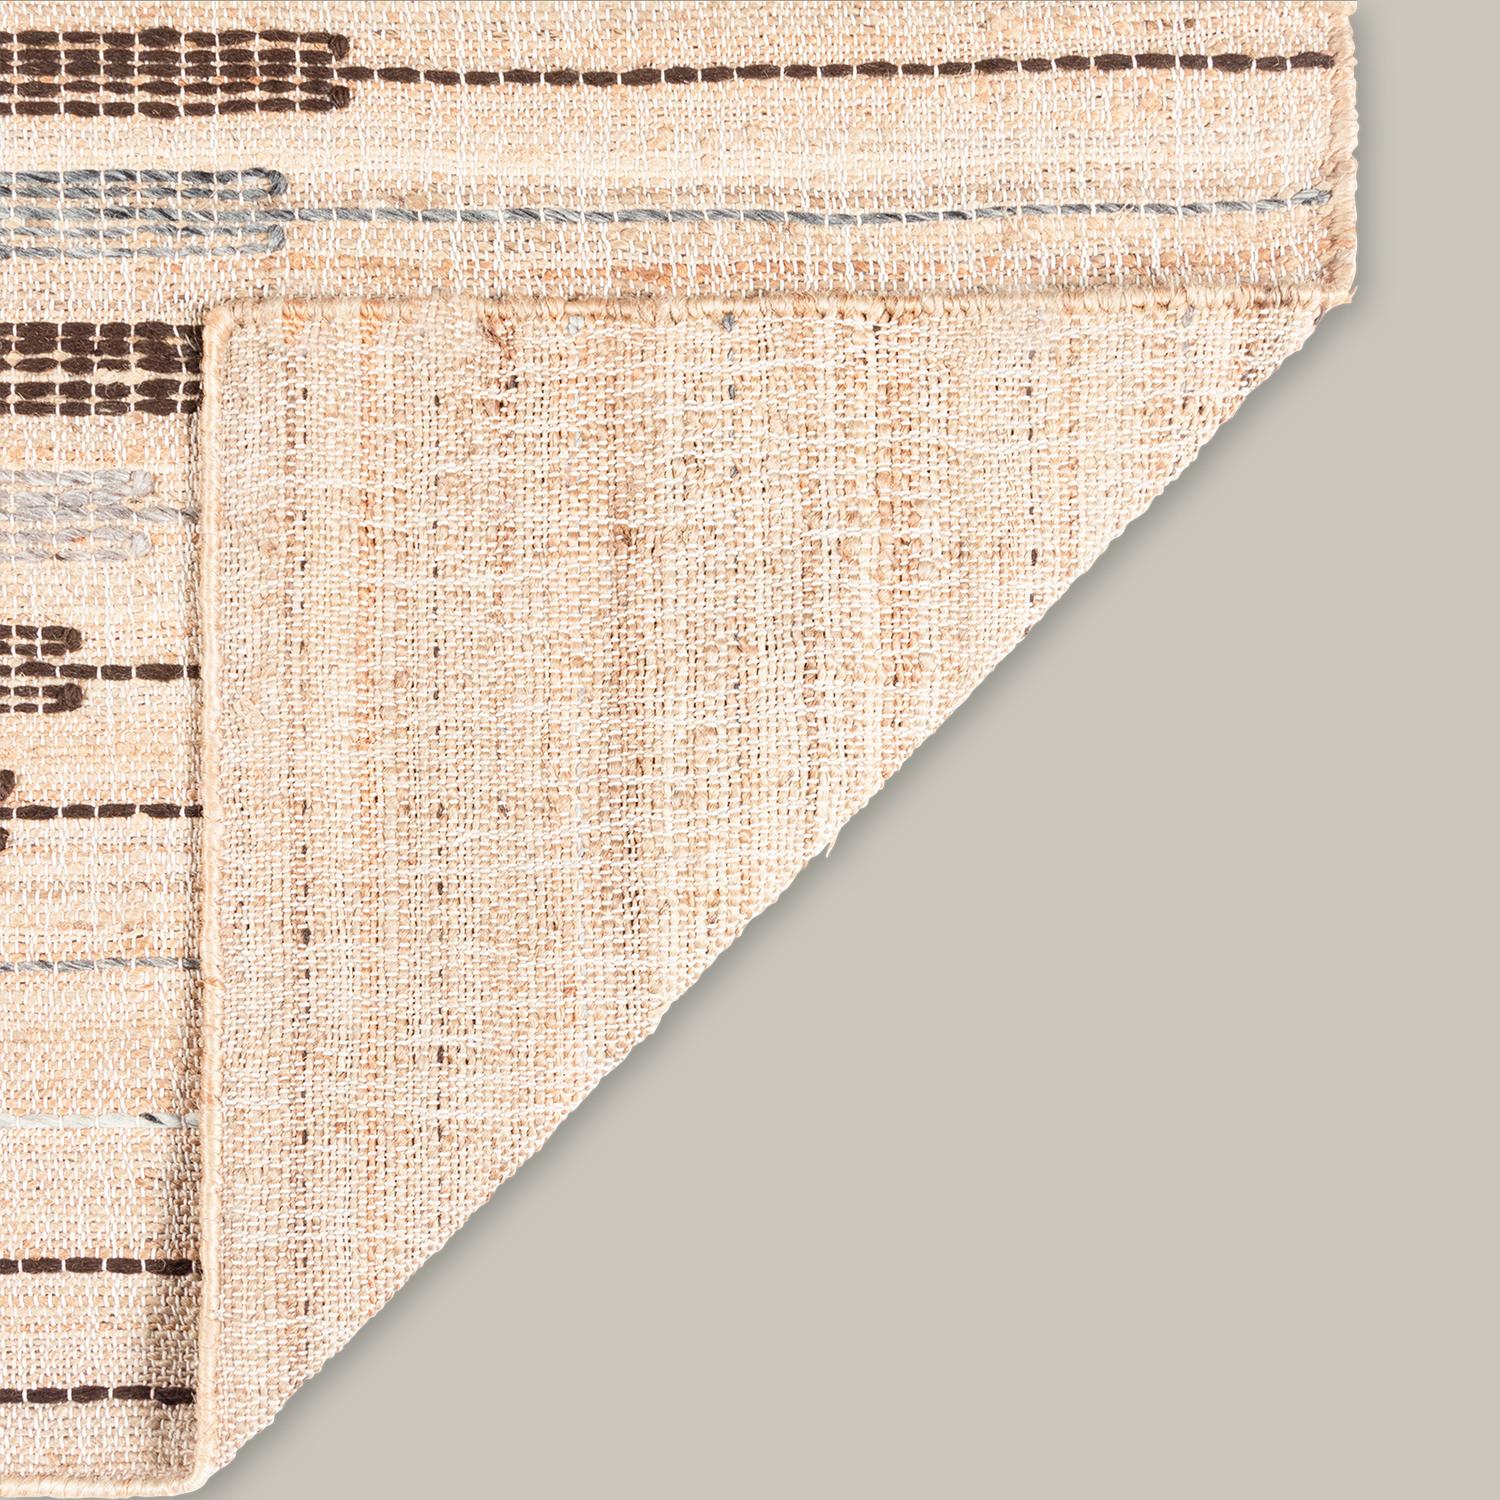 Hand-Woven “Argan Dimbokro” African Mud cloth-Inspired Rug by Christiane Lemieux For Sale